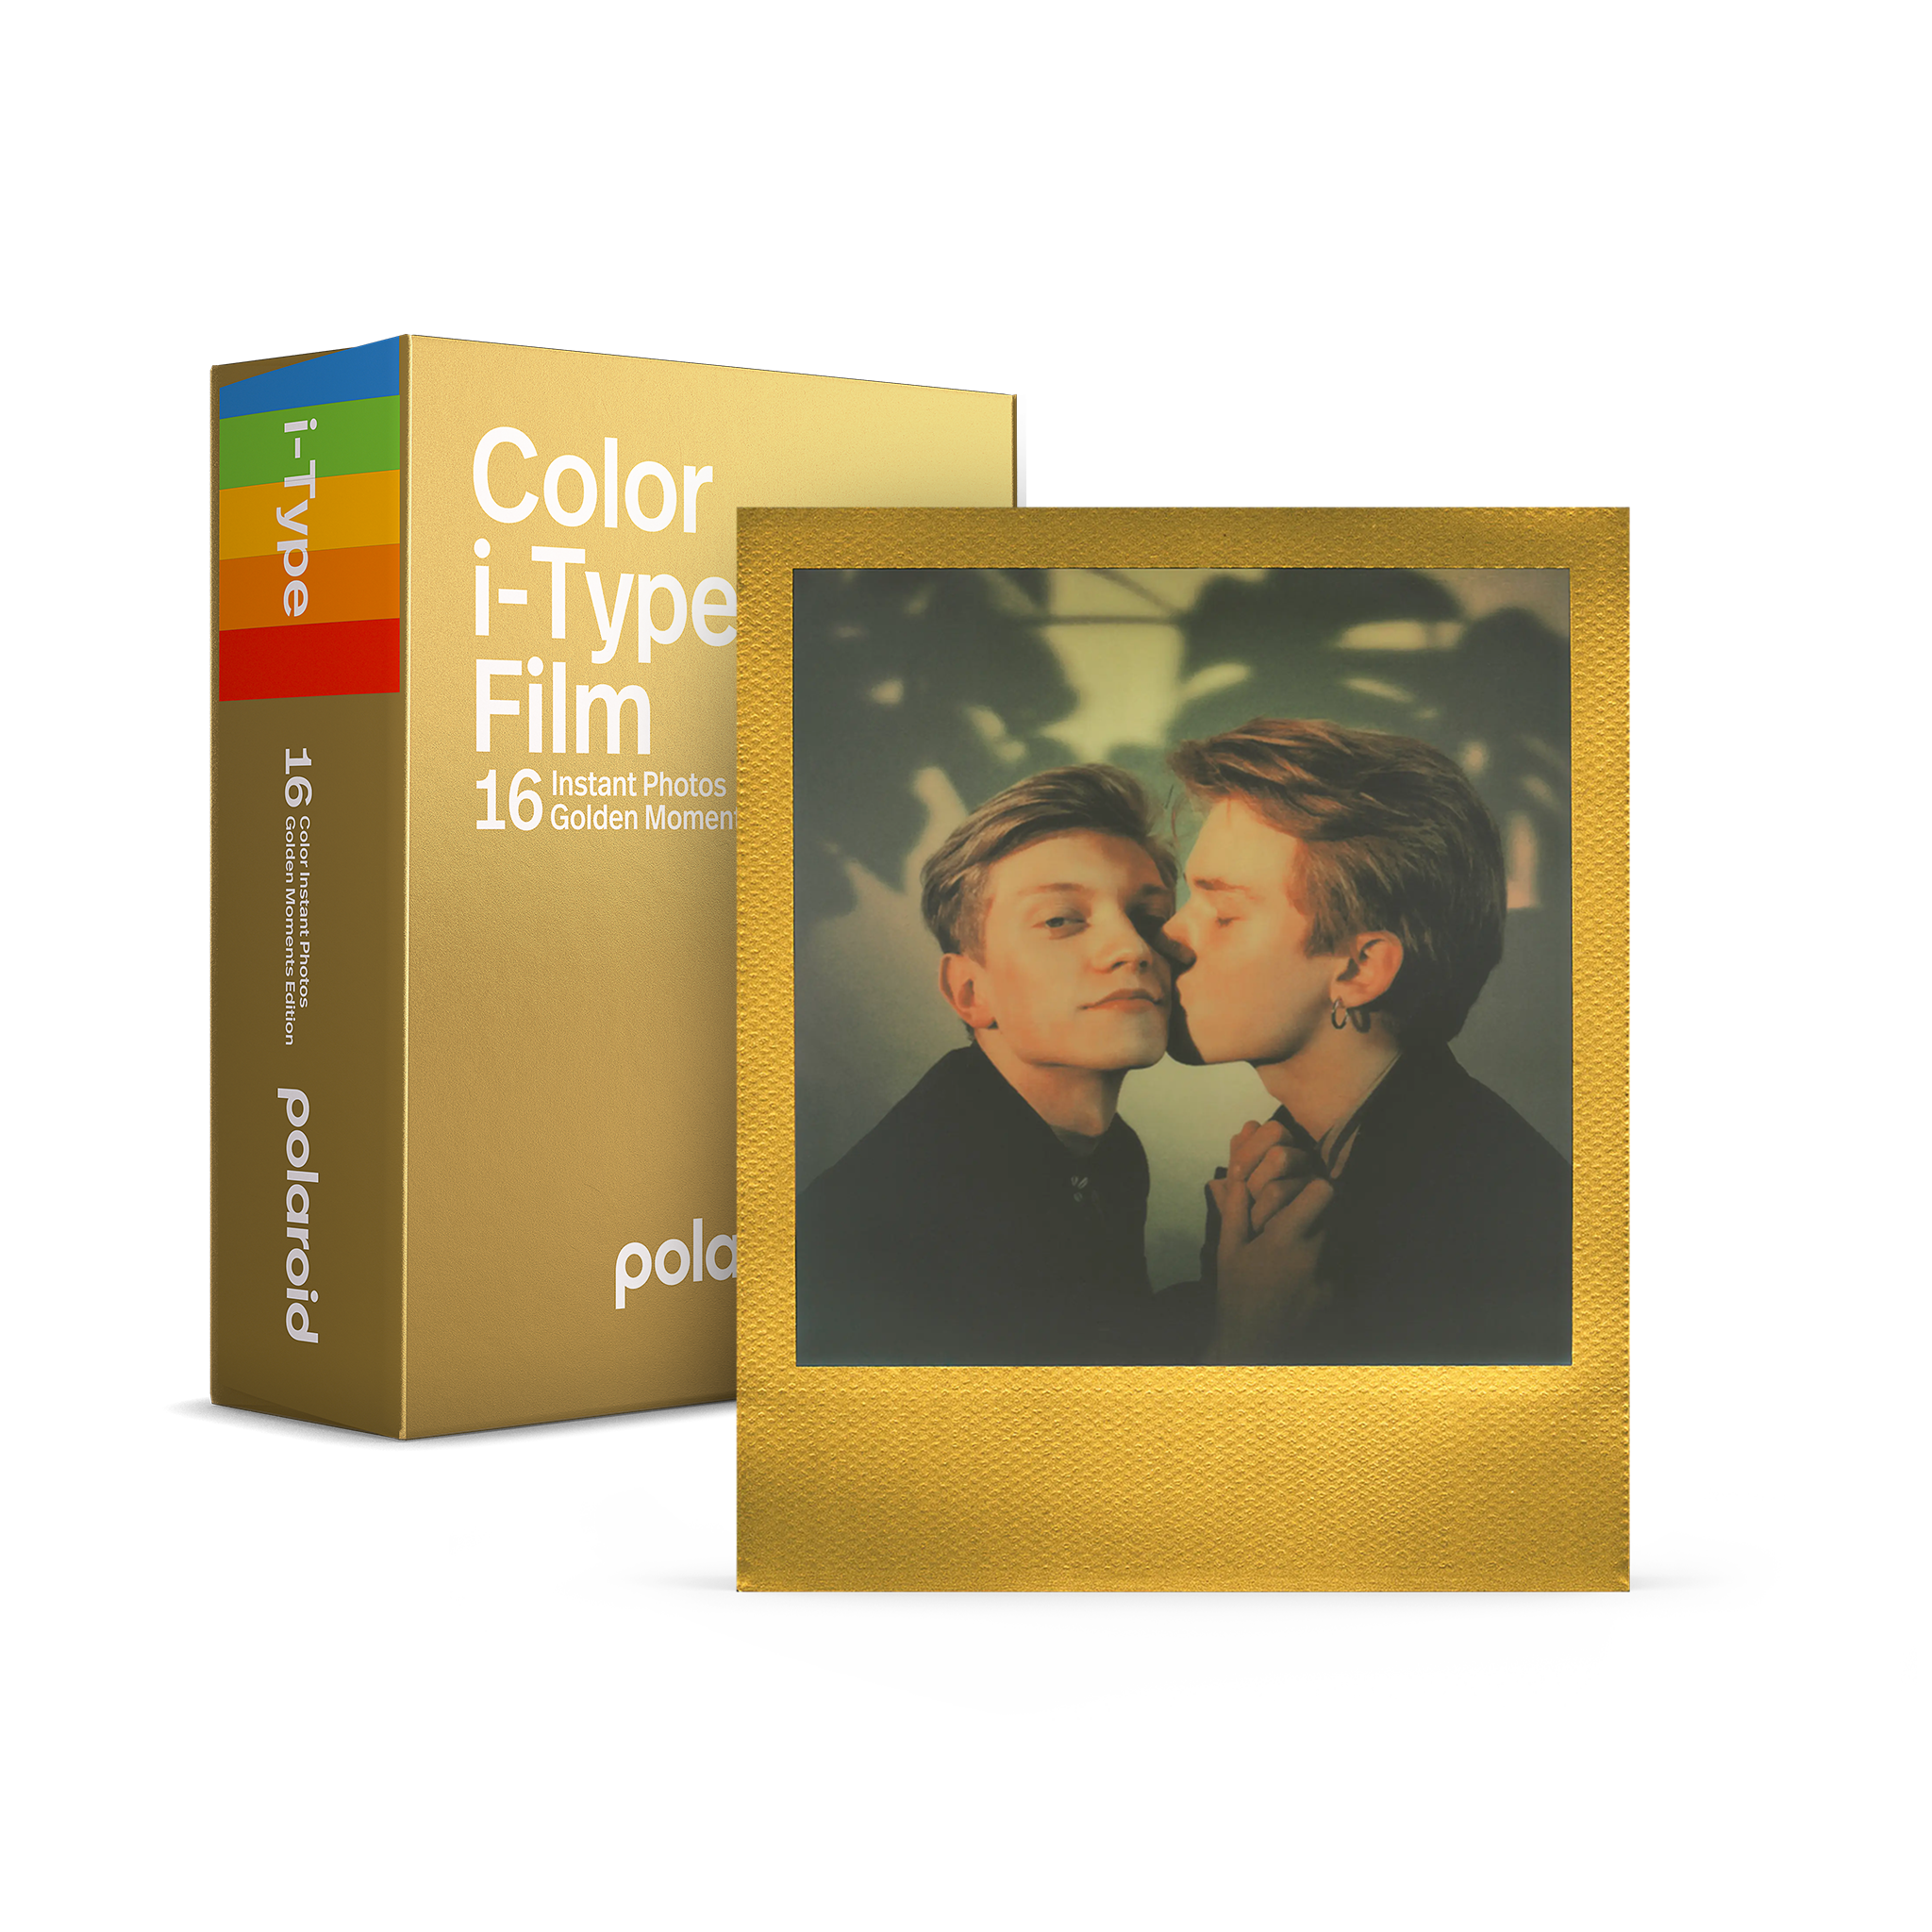 Polaroid Color i-Type Film - Pantone Color of the Year 2024